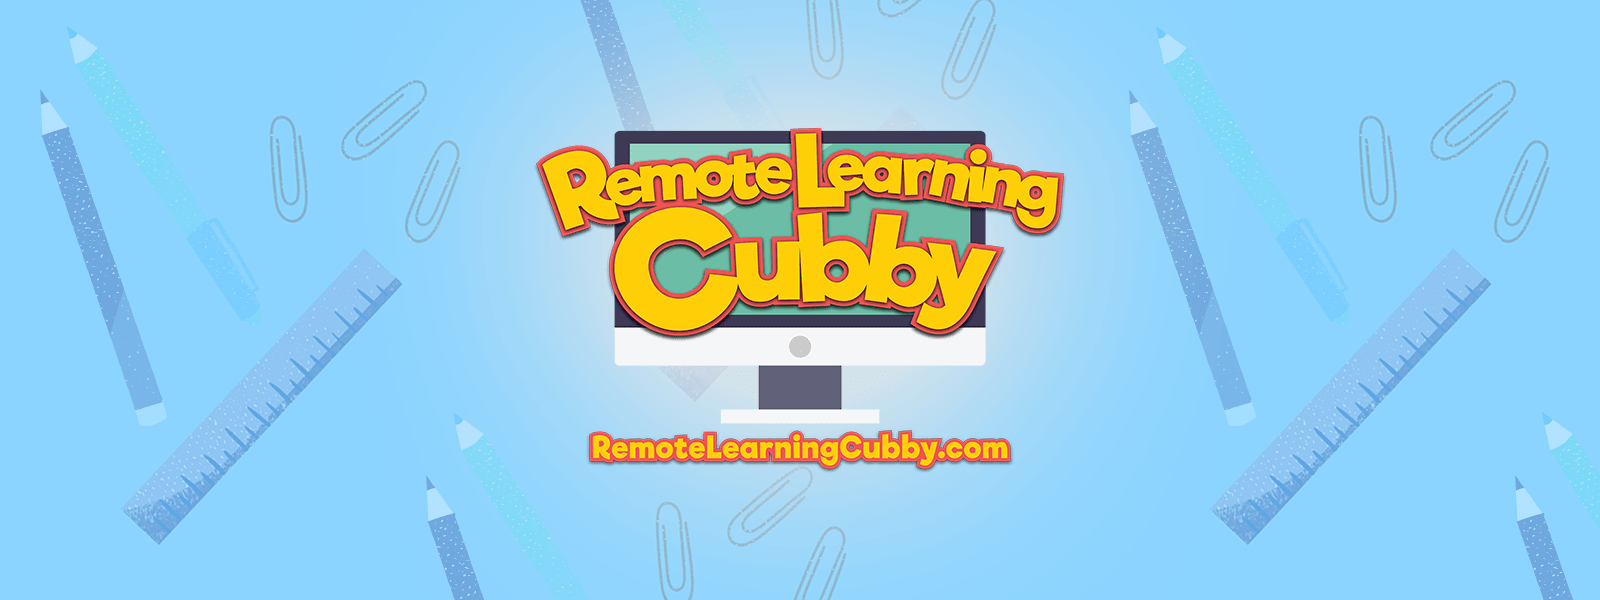 Remote Learning Cubby